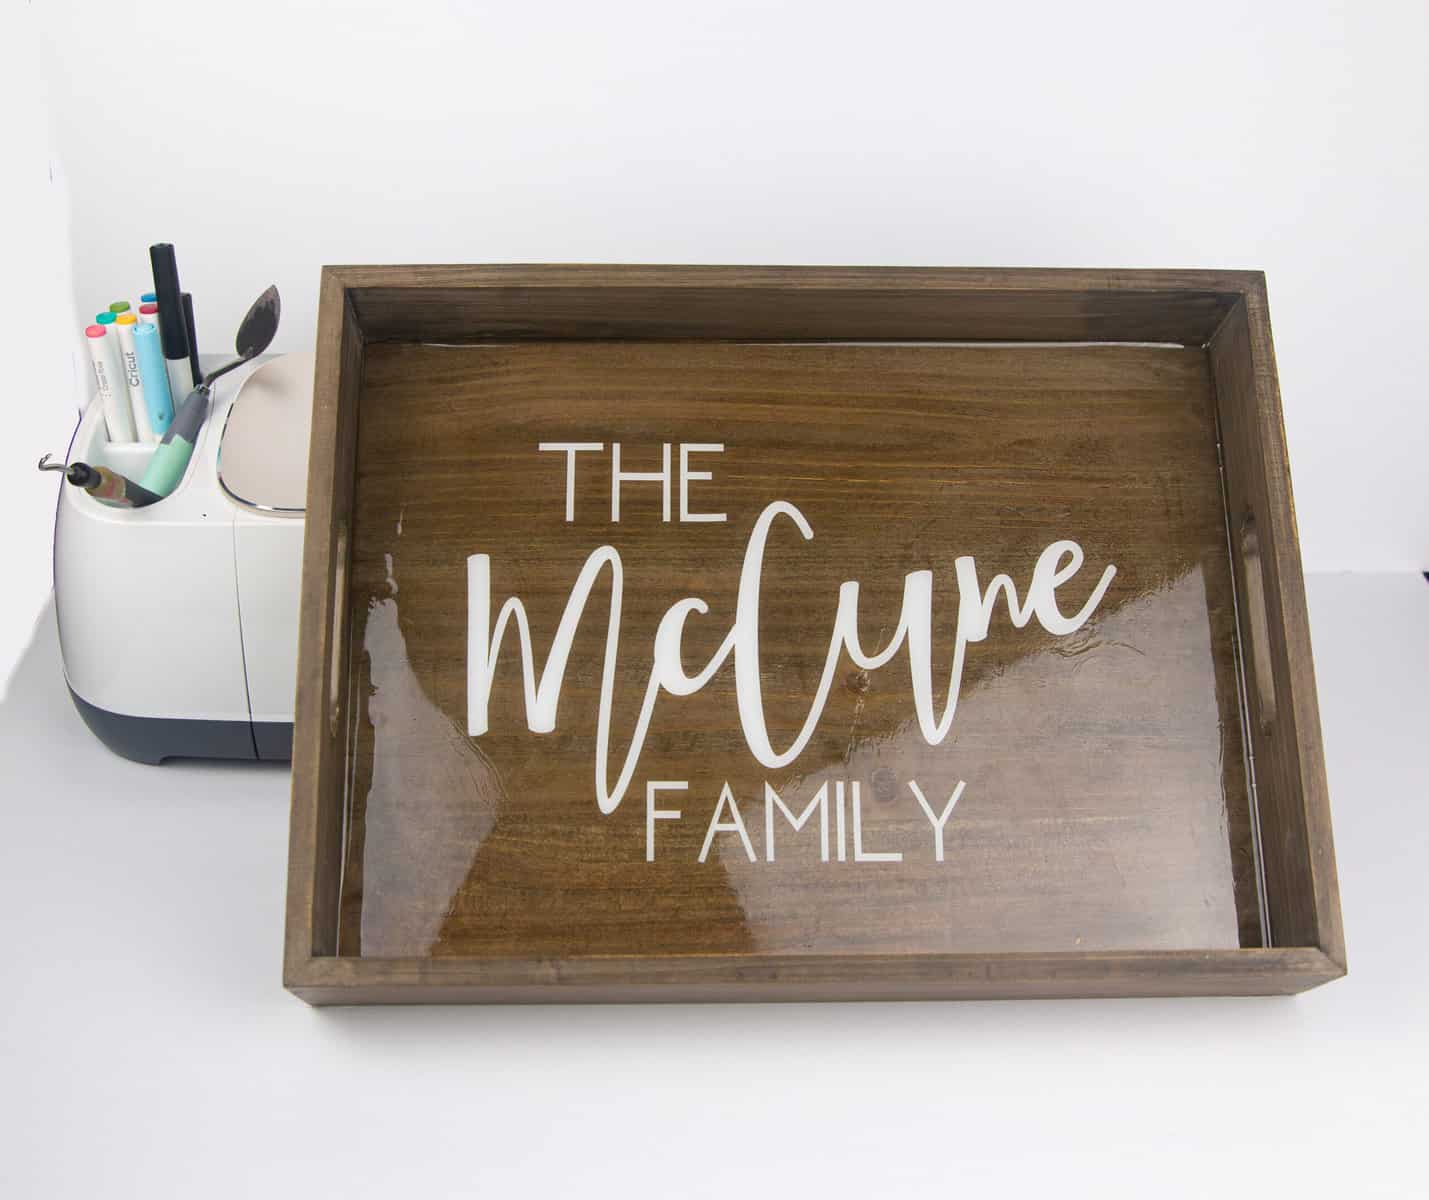 Personalized Serving Tray with Cricut